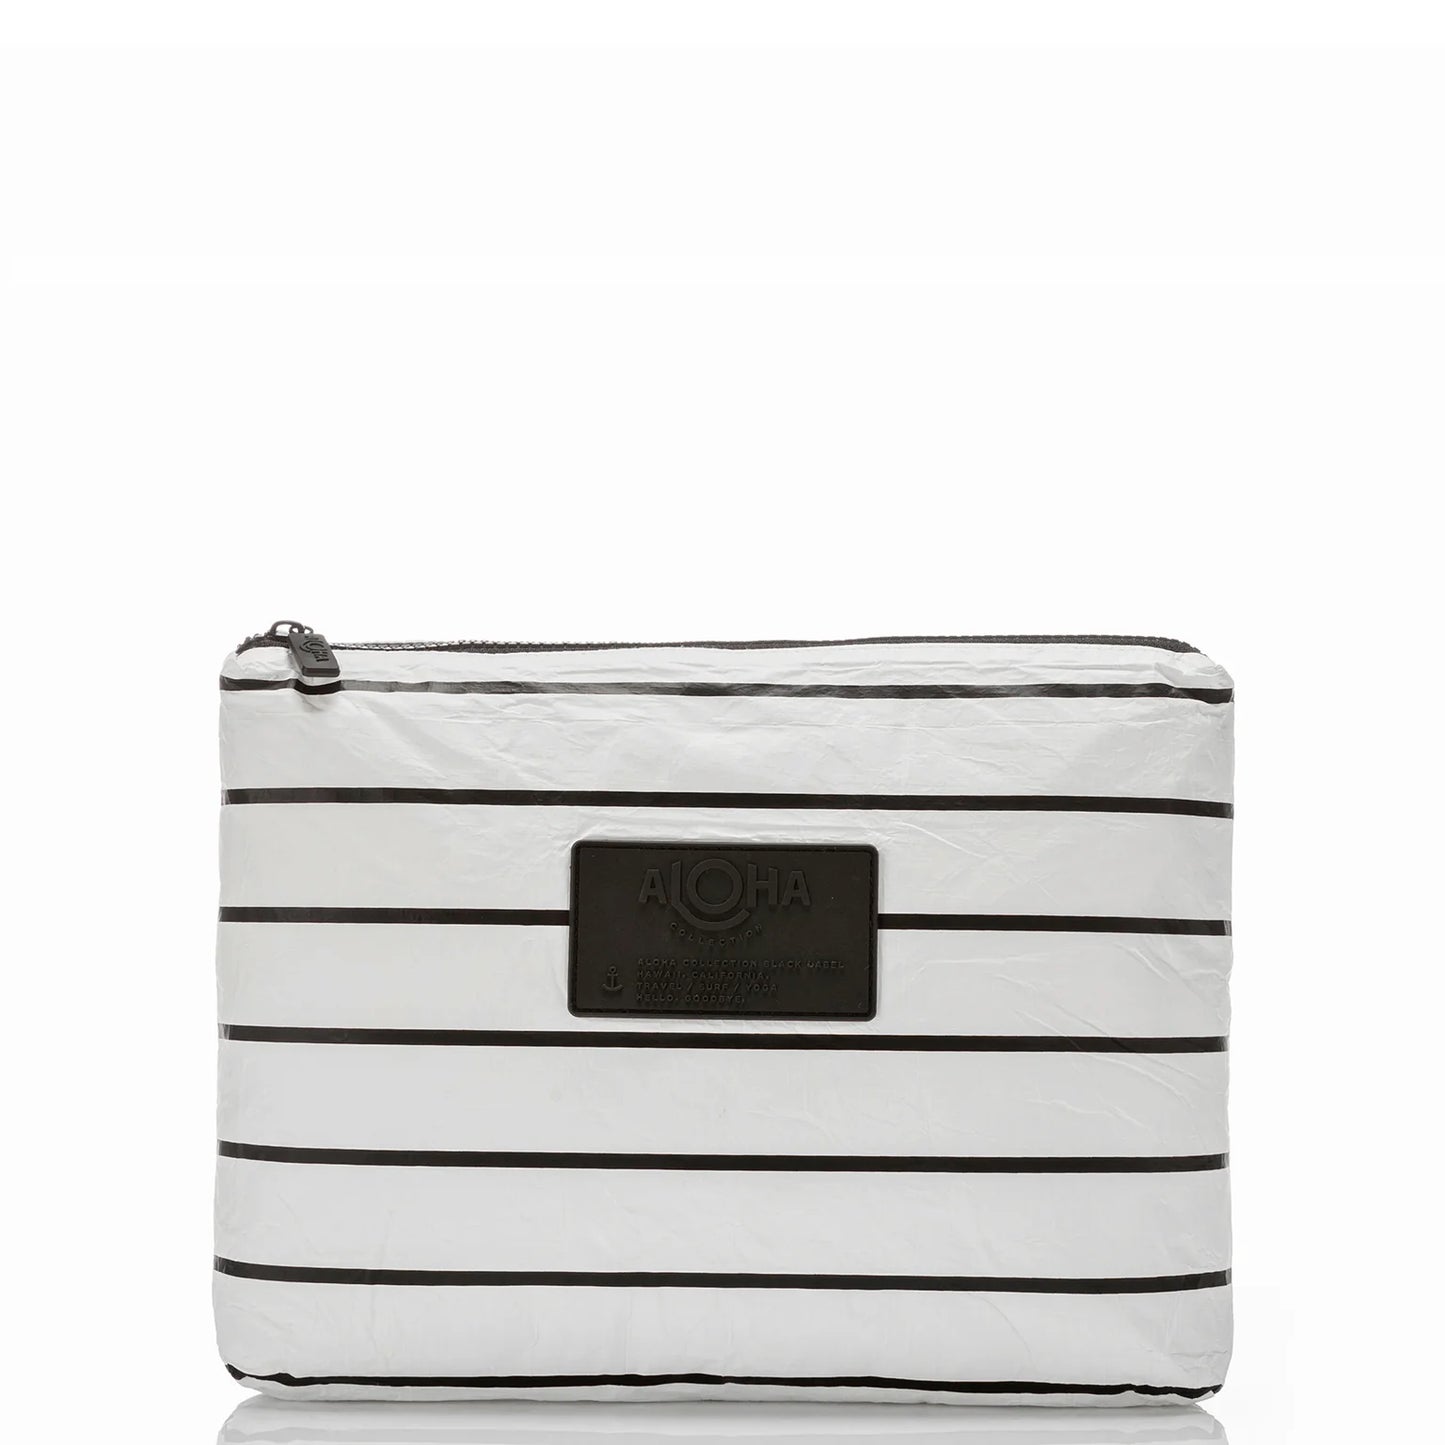 MID POUCH - BLACK ON WHITE